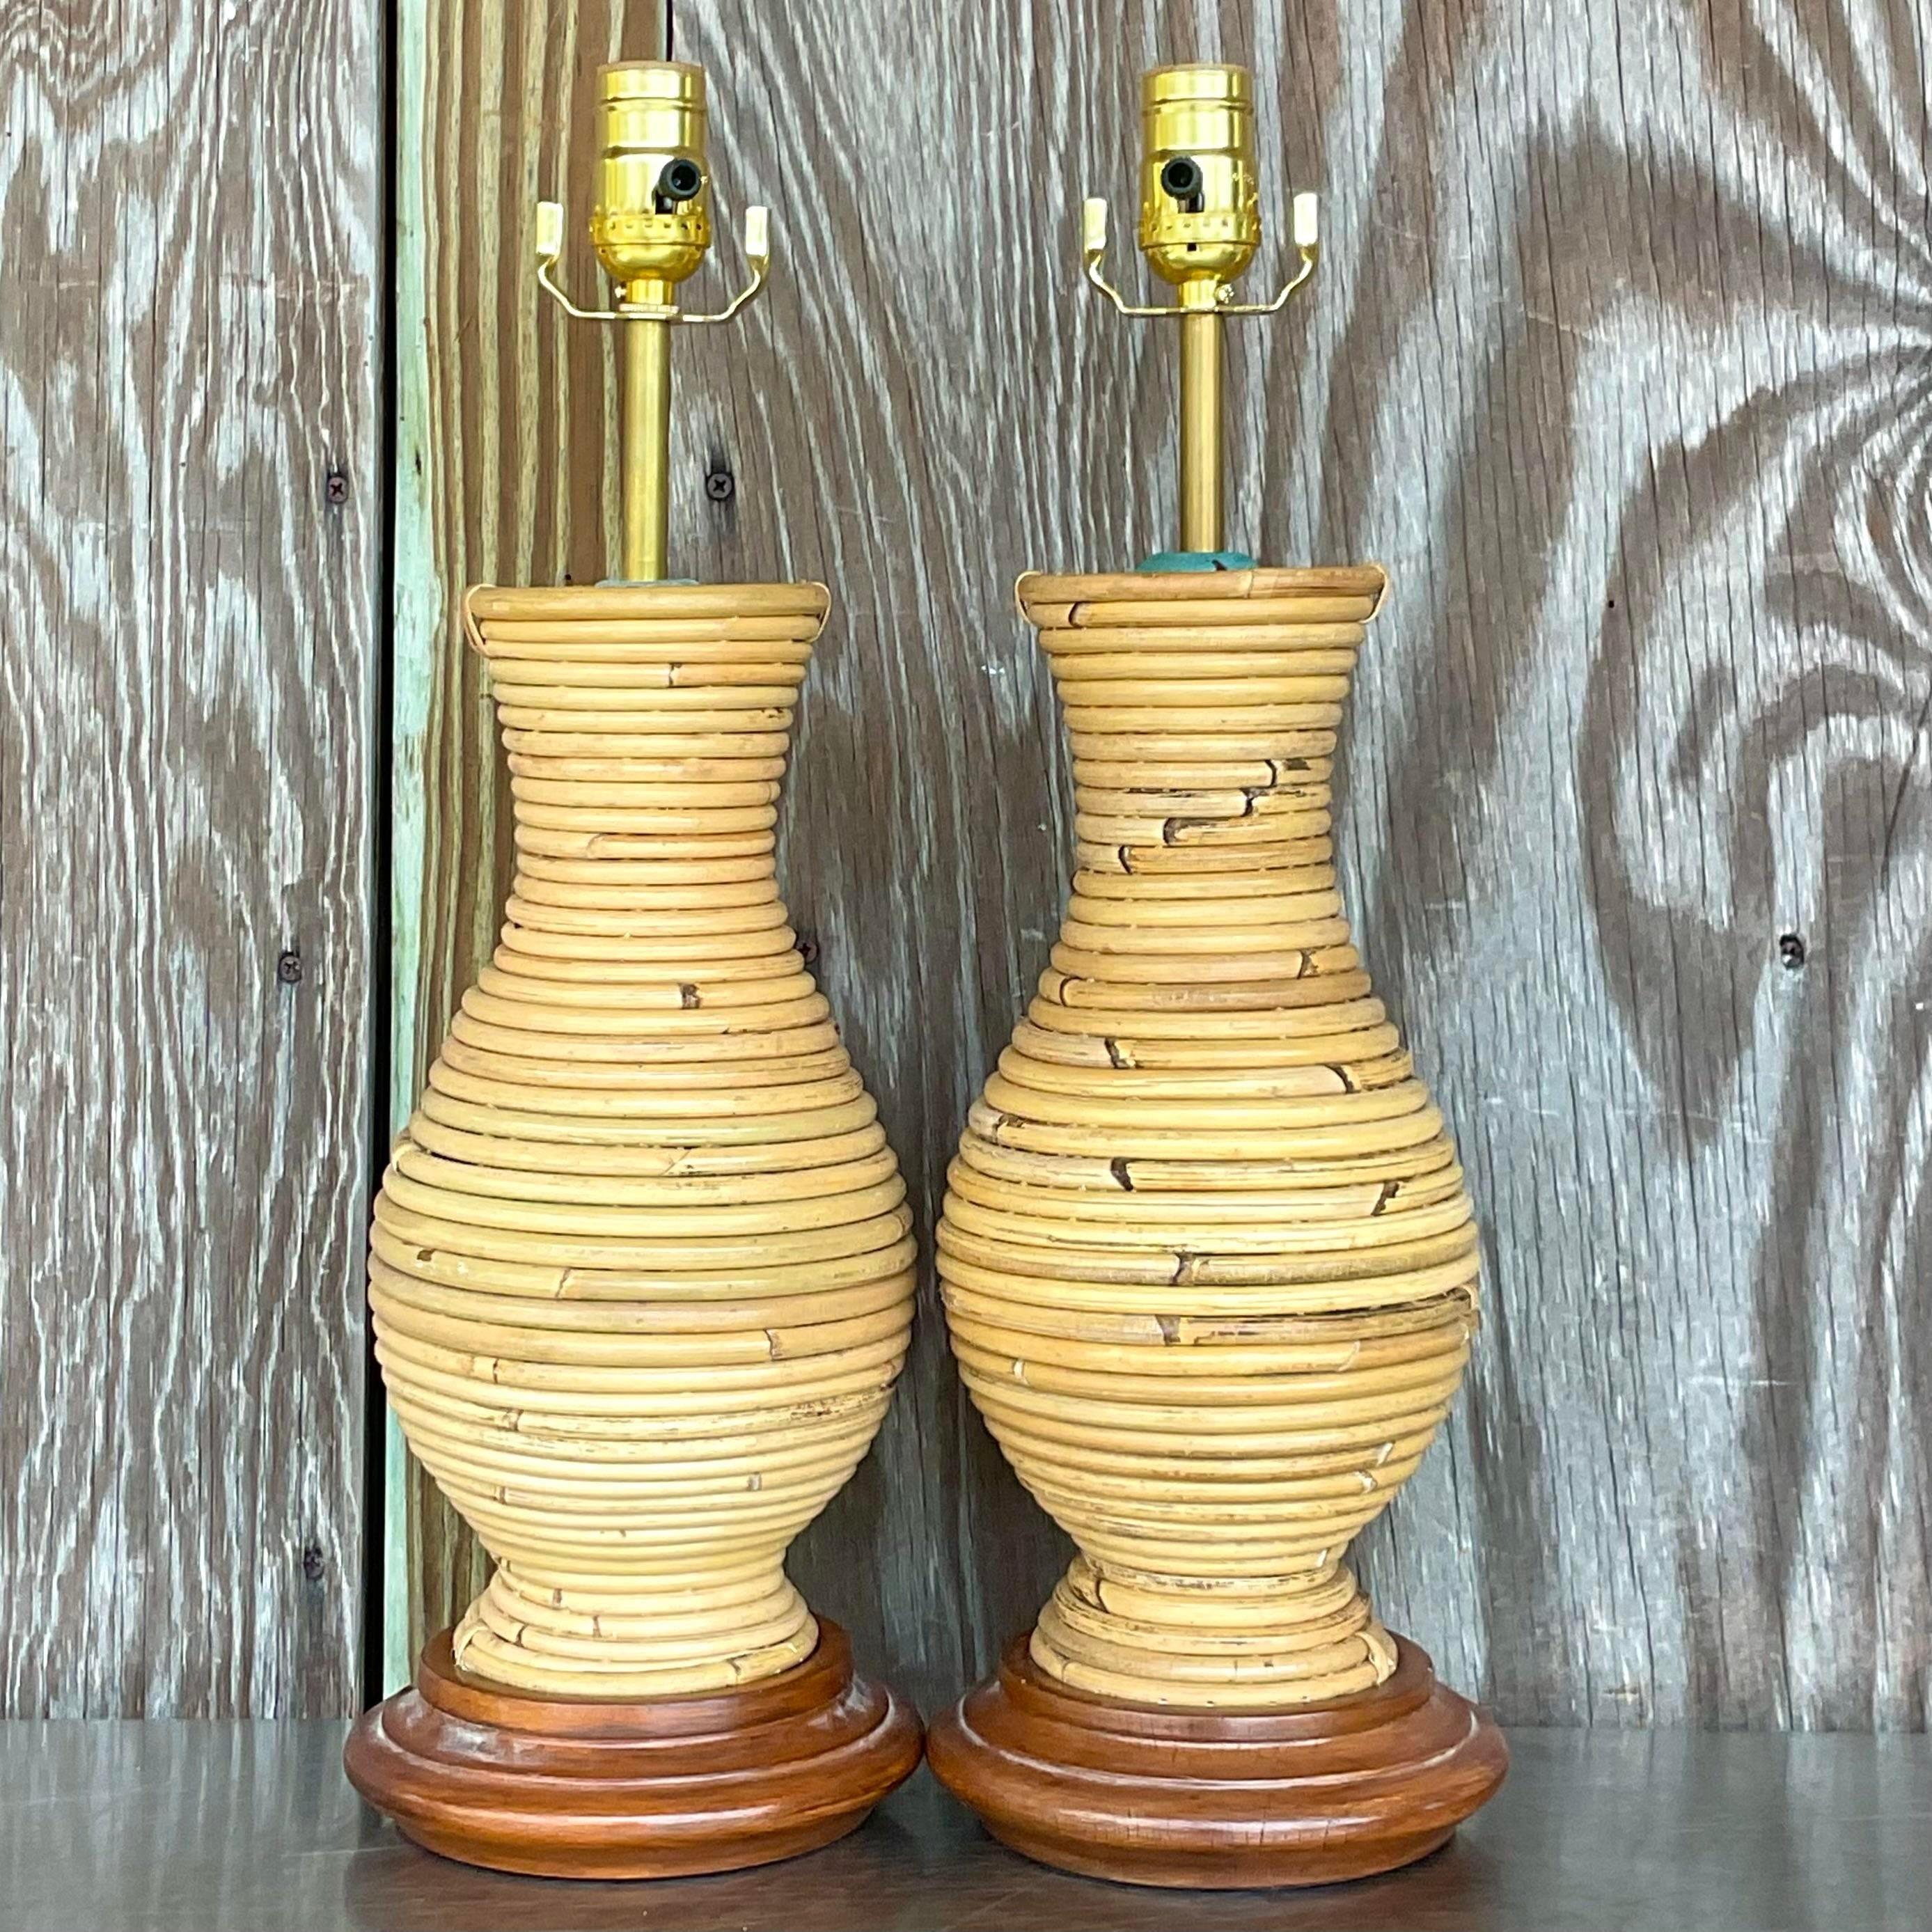 A stunning pair of vintage Coastal table lamps. Chic coiled pencil reed on a wooden plinth. Patinated metal hardware on top. Fully restored with all new wiring and hardware. Acquired from a Palm Beach estate.